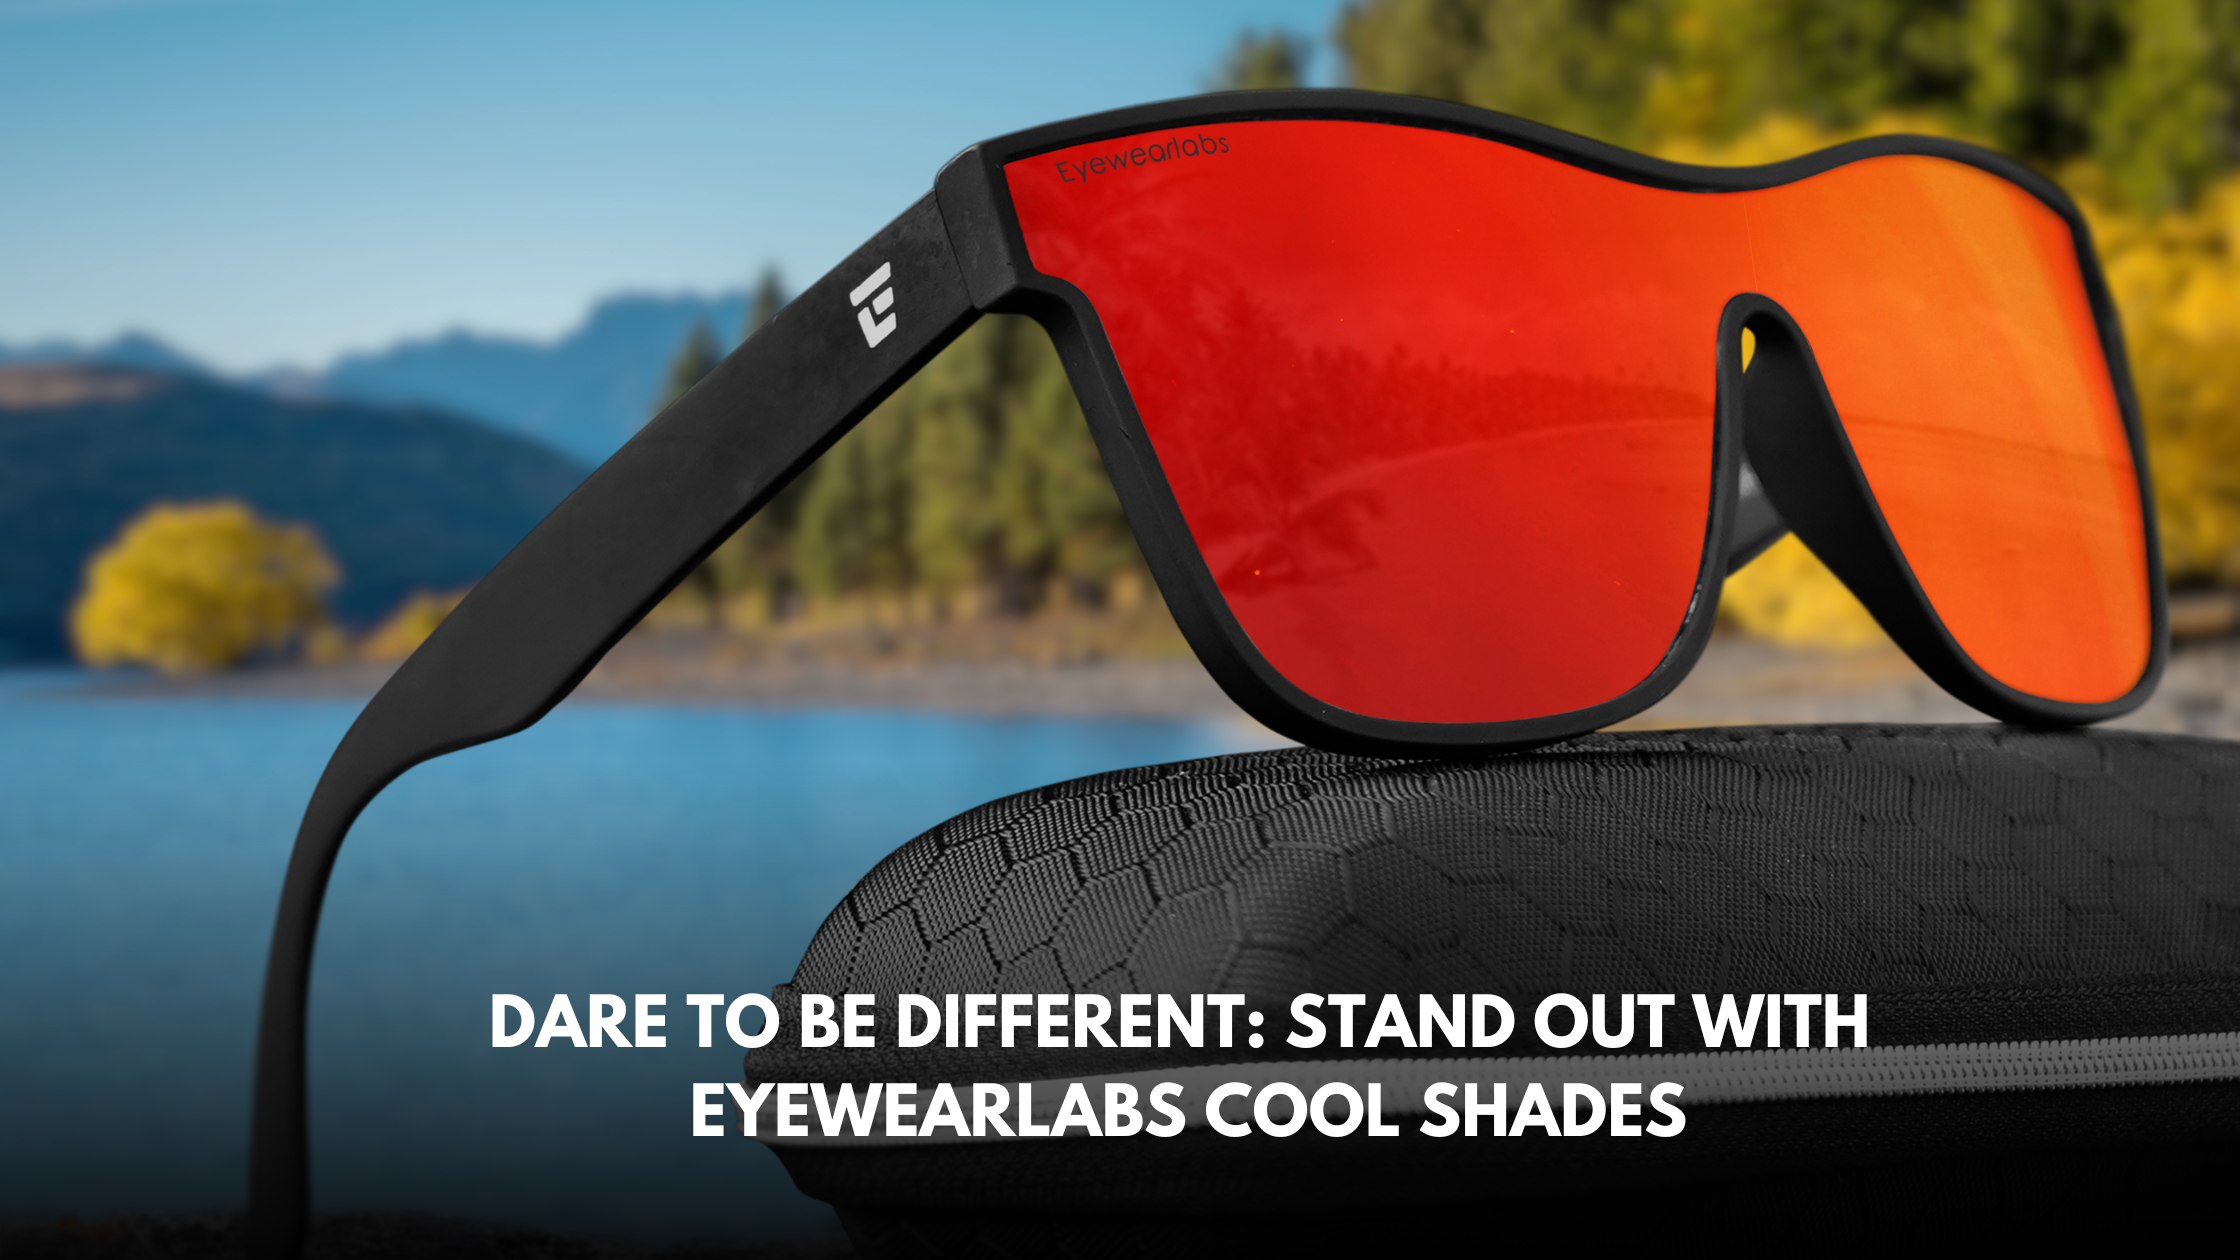 Dare to Be Different: Stand Out with Eyewearlabs Cool Shades